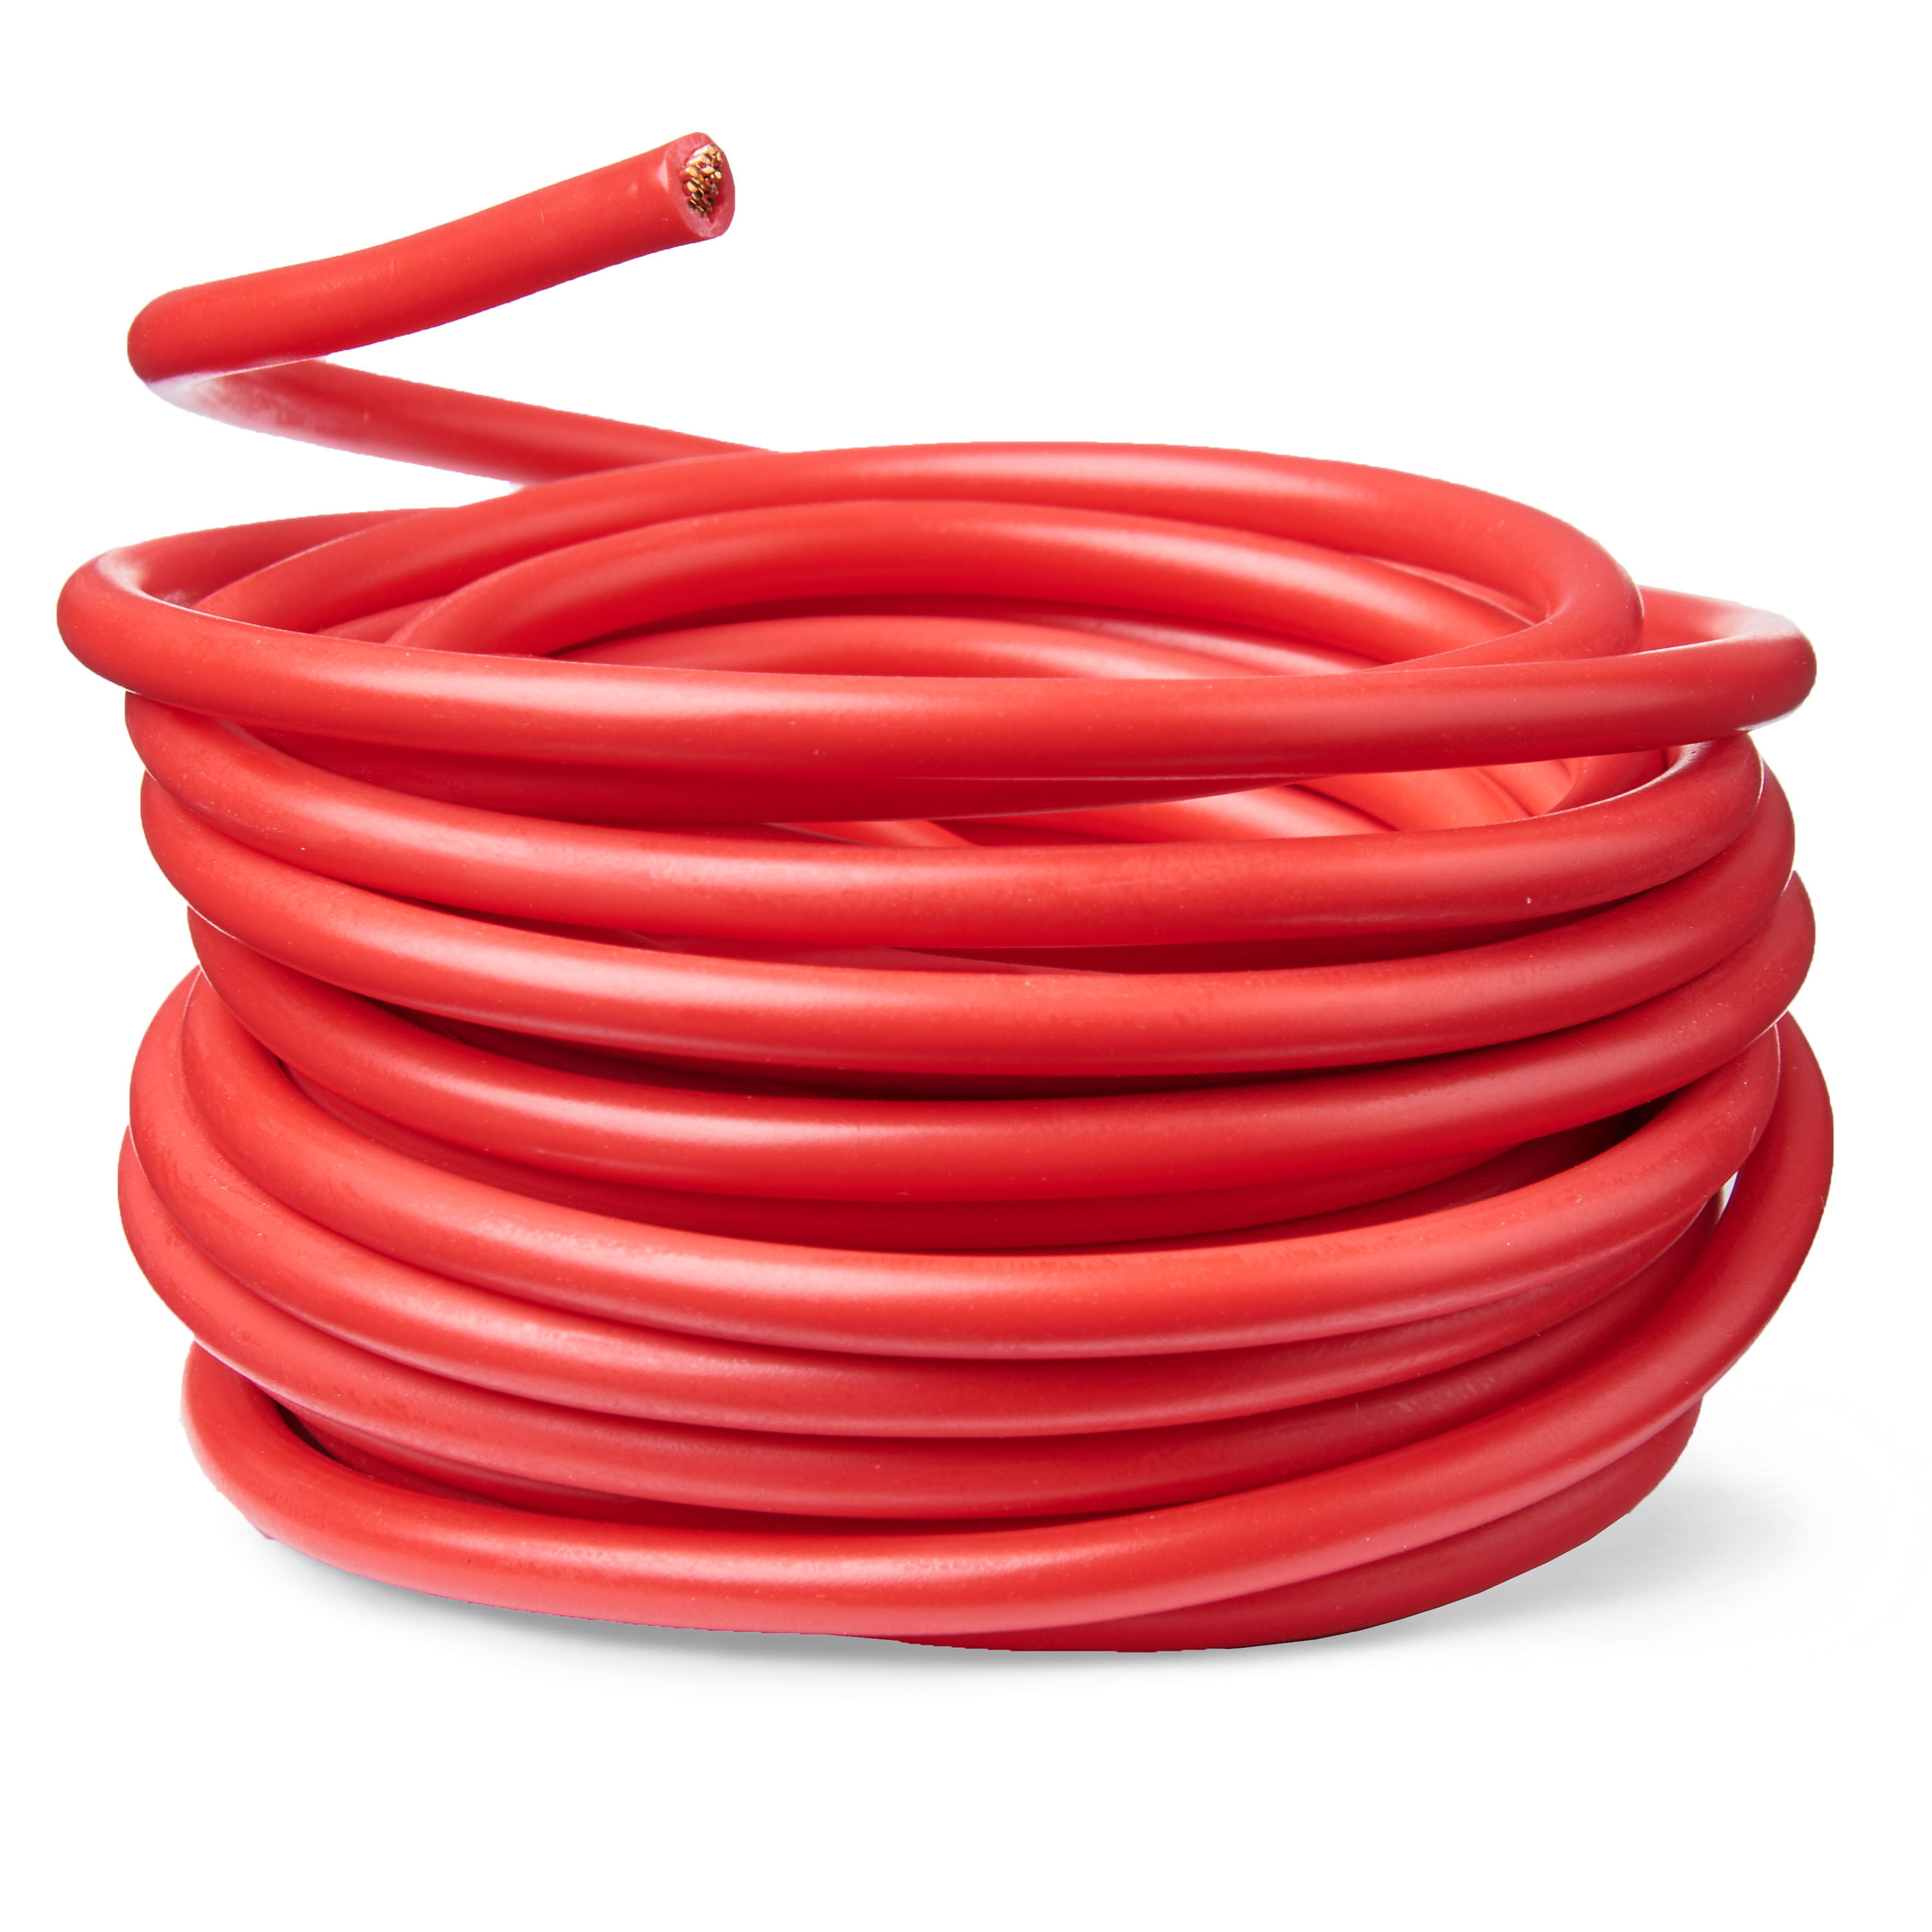 EverStart Universal 12-Gauge Auto Wire, Red, 12 feet, Light Swith to Fuse Block or Relay for Car - image 2 of 8